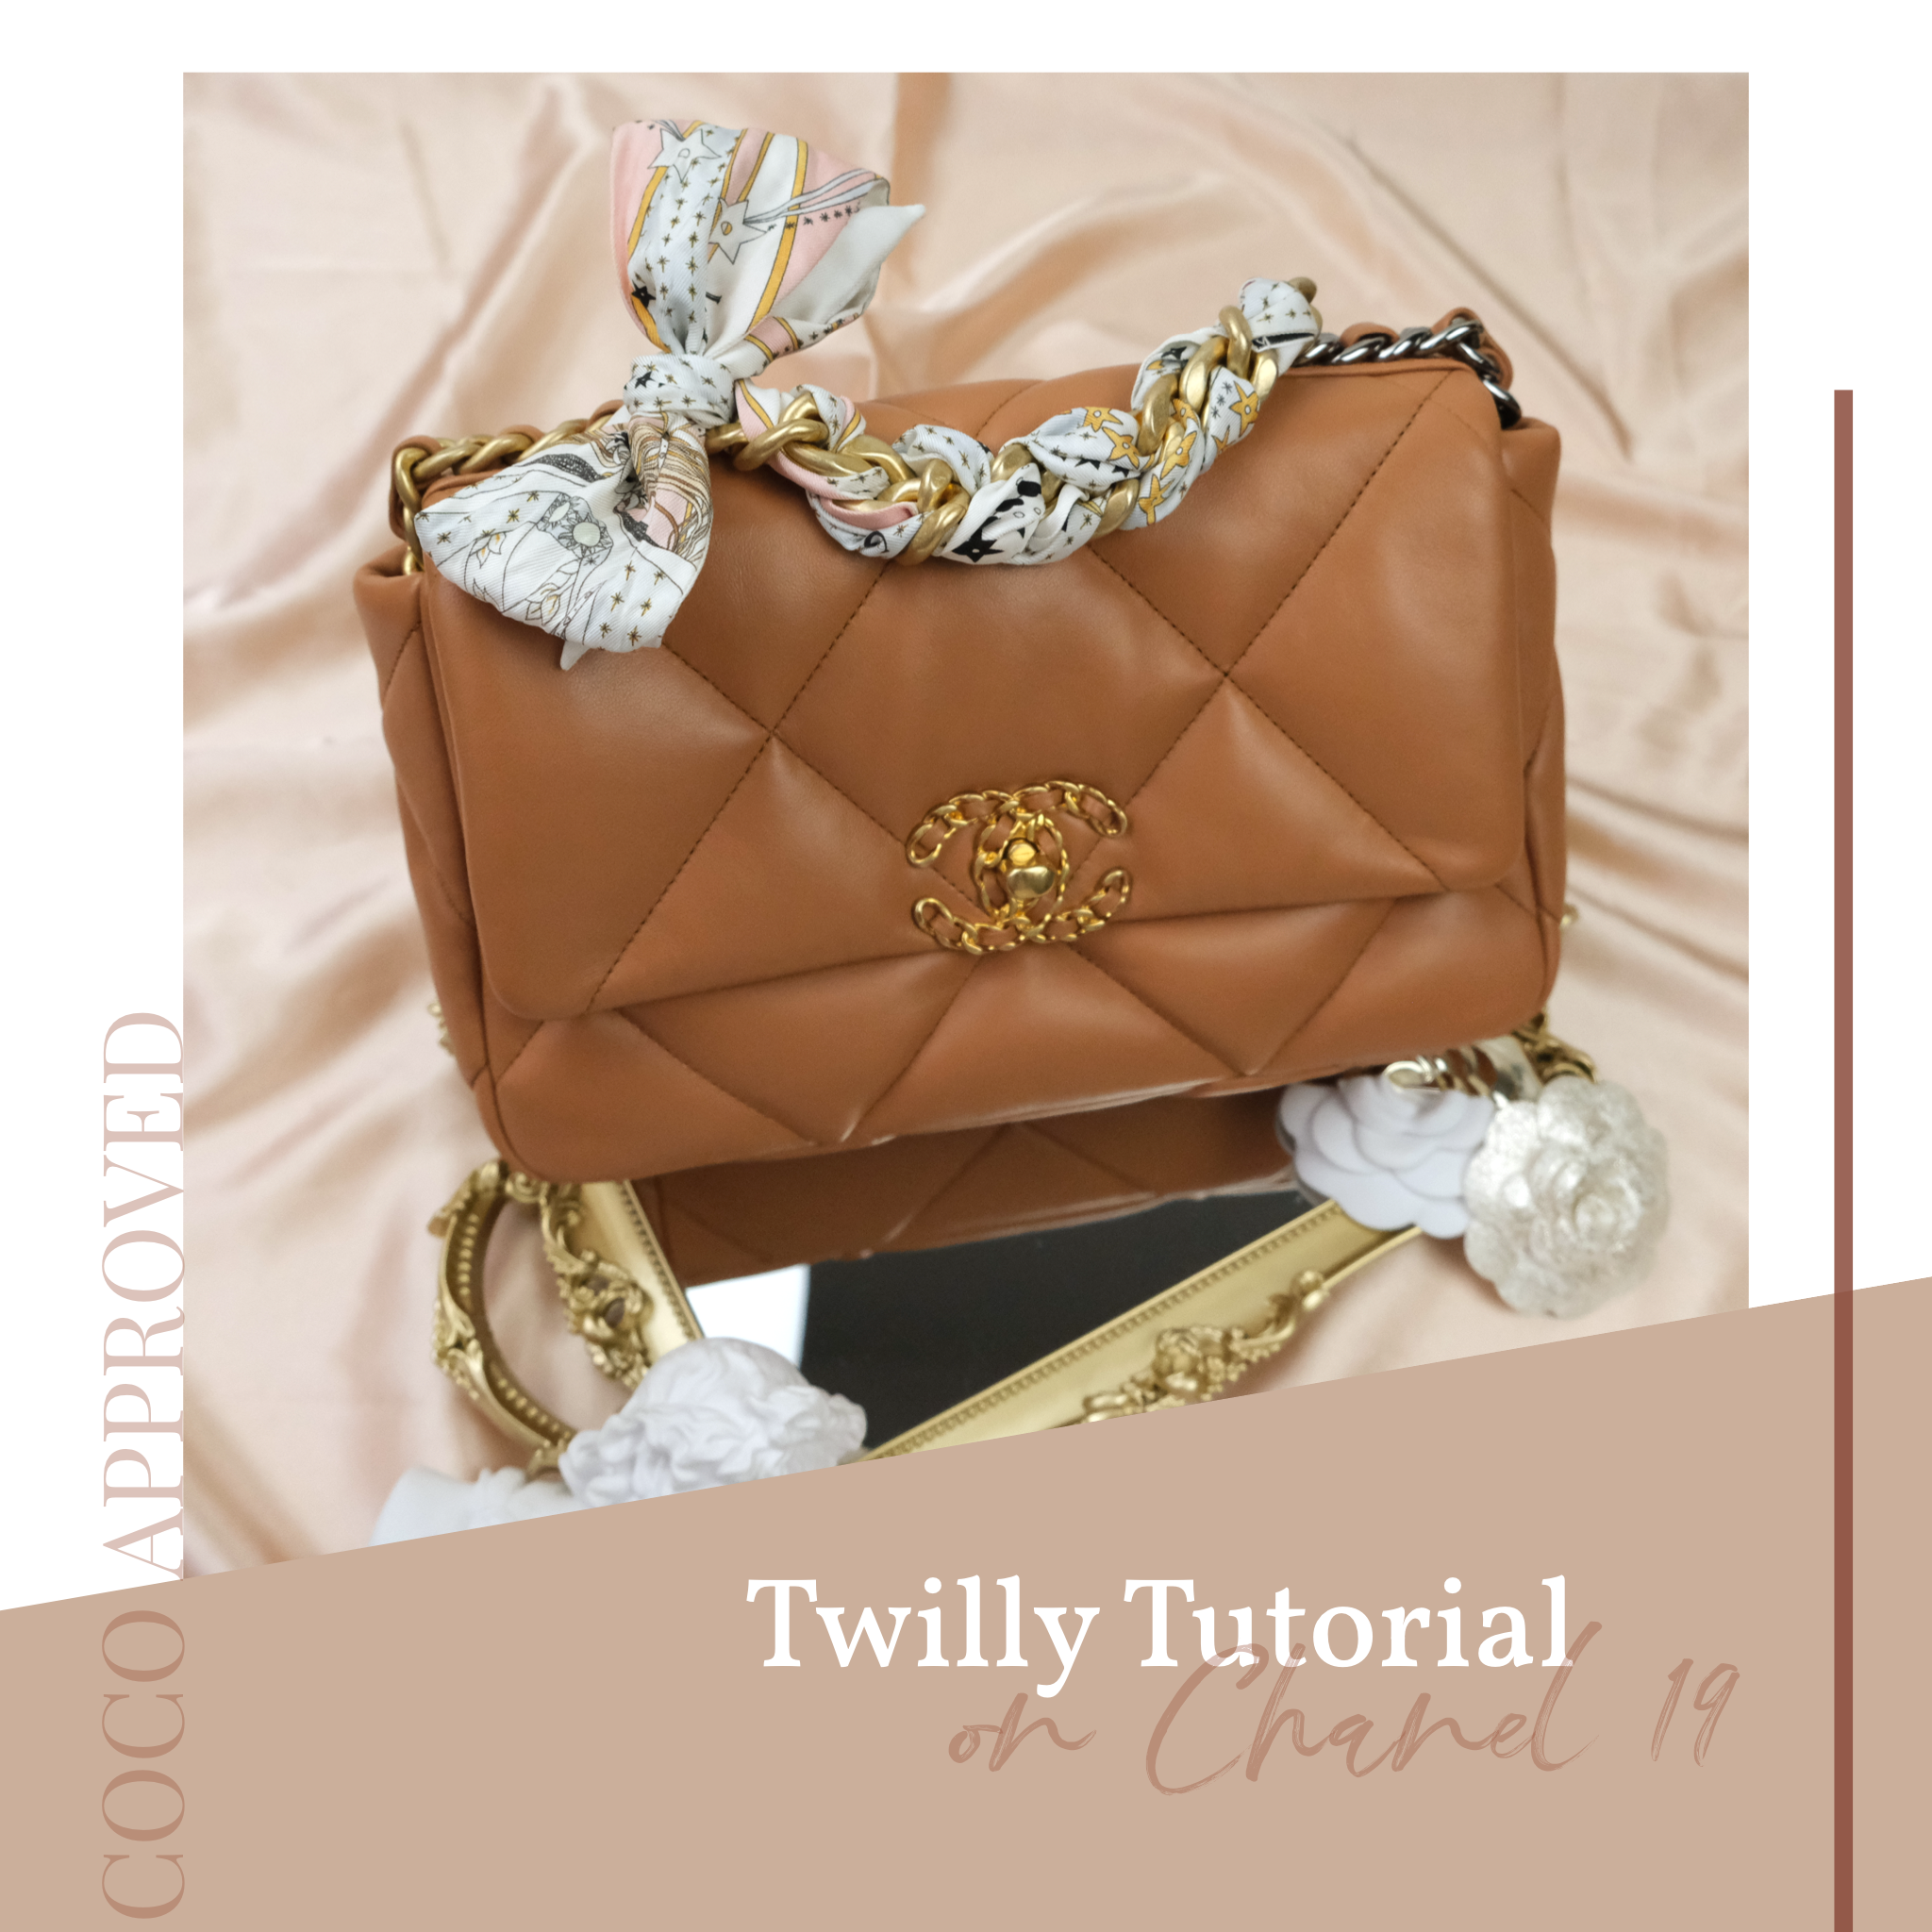 Turn Your Chanel 19 To A Unique Piece - Twilly Tutorial – Coco